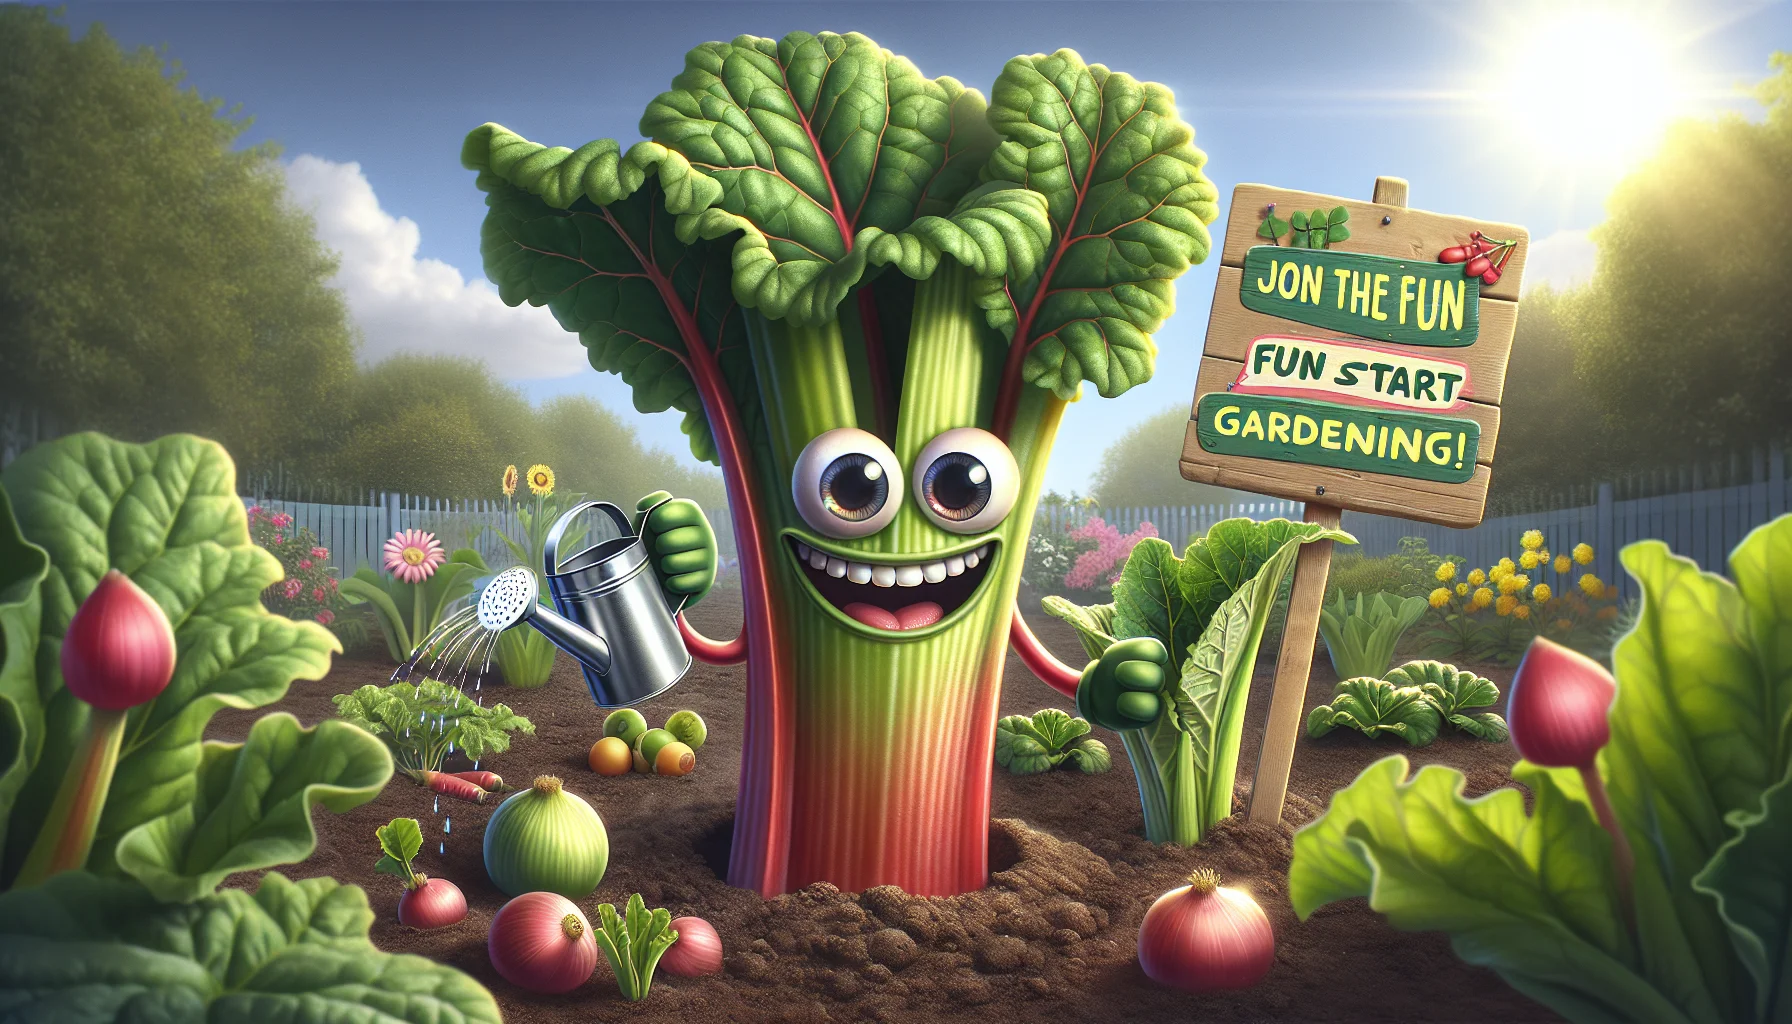 Realistic illustration of an anthropomorphized Rheum Rhabarbarum (rhubarb plant) in a garden setting. The rhubarb sports googly eyes and a wide, infectious grin that expresses humor and exuberance. It is holding a tiny watering can in one leaf and a sign reading 'Join the Fun, Start Gardening!' in another. Surrounding it are a variety of other thriving plants, the soil is freshly tilled, and the sun is shining brightly high above. The scene is brimming with the pleasures and benefits of gardening, encouraging onlookers to take up the hobby.